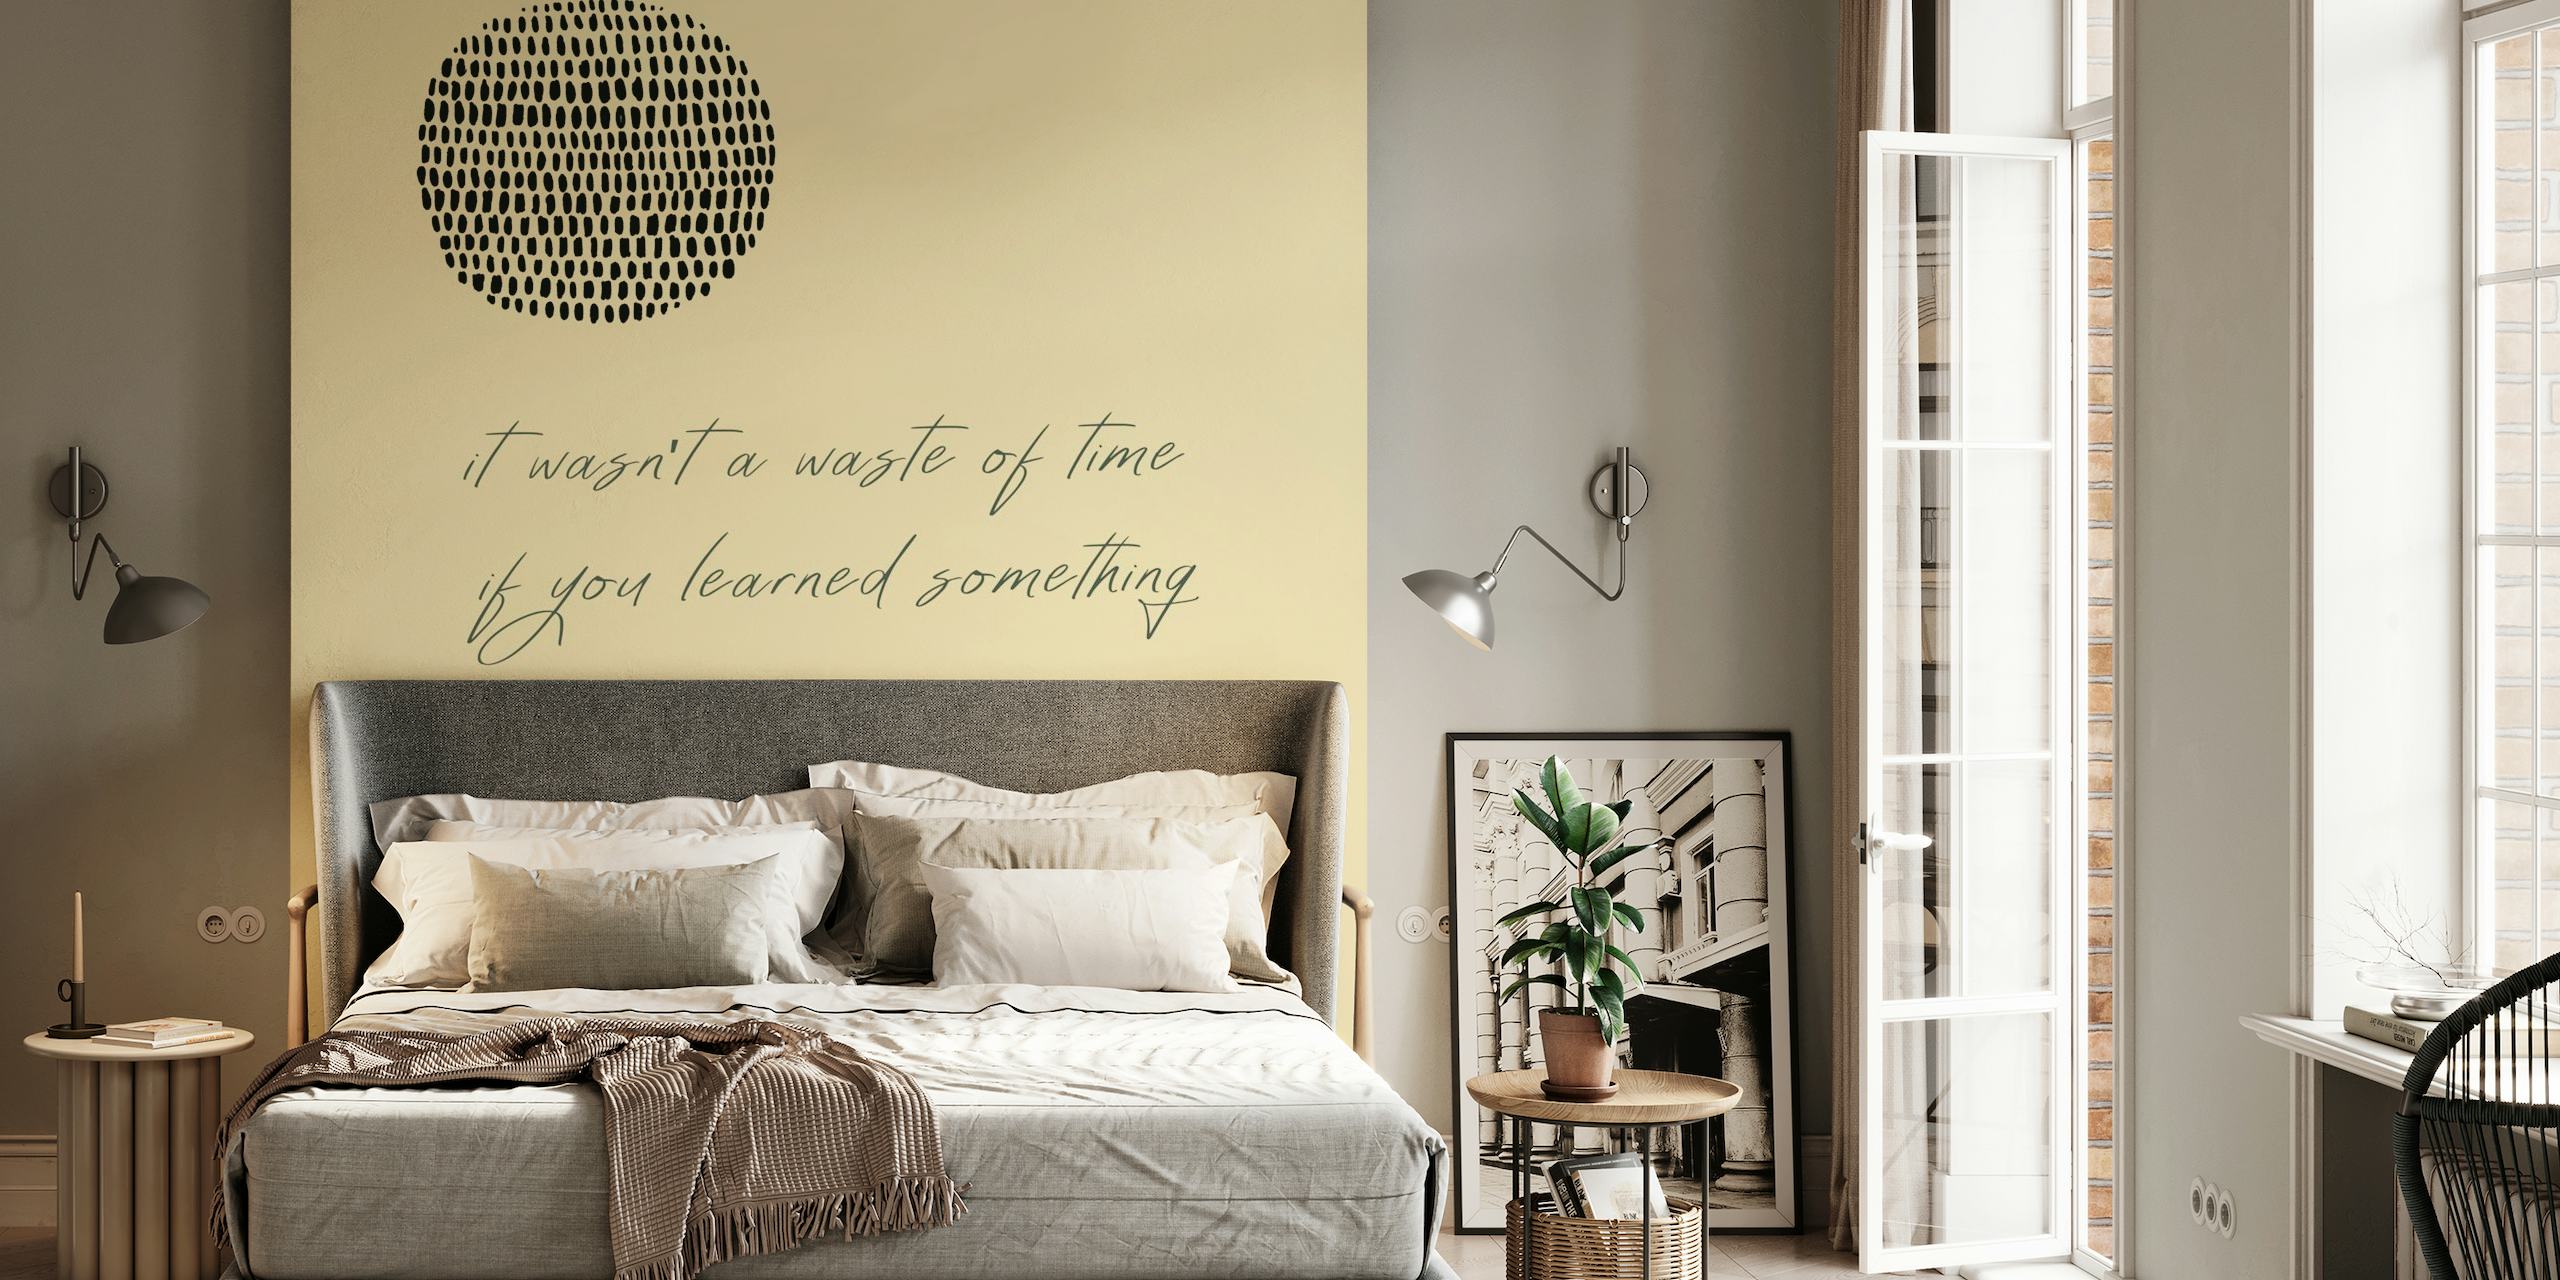 Zen-inspired wall mural with minimal ink stones and inspirational quote on a light background